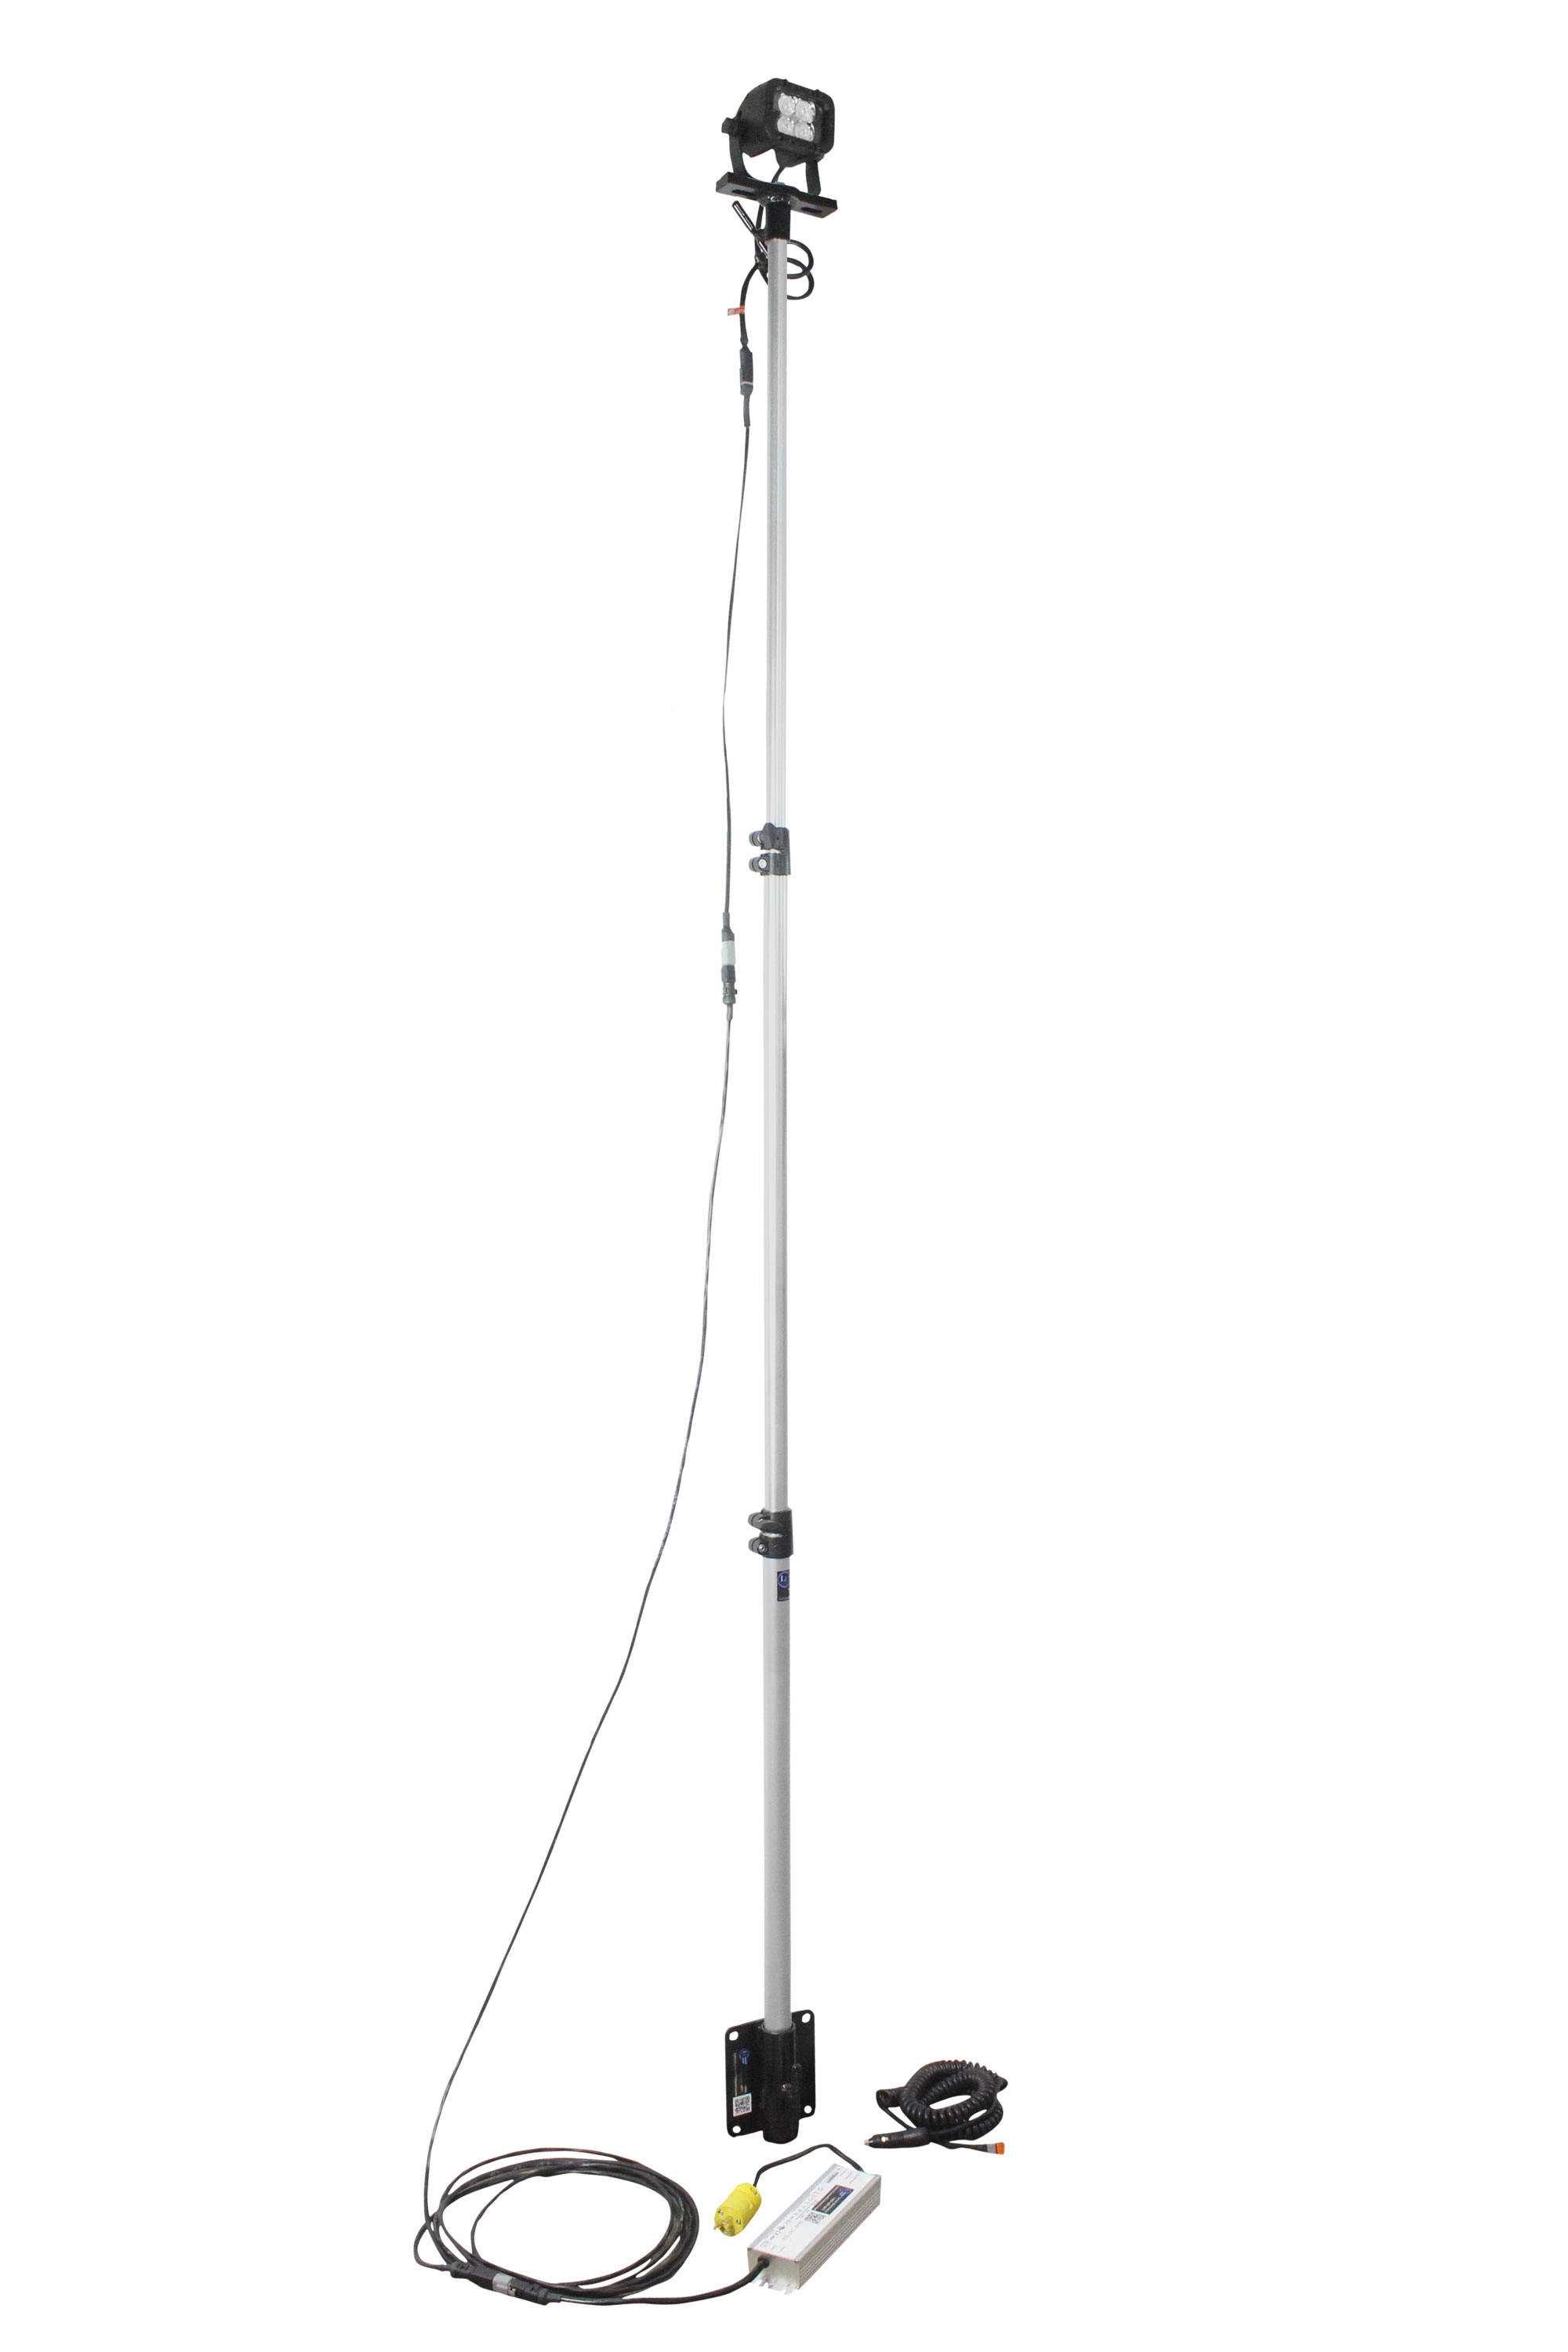 3.5' to 8' Telescoping Light Pole Equipped with a 12 Watt LED Light Head